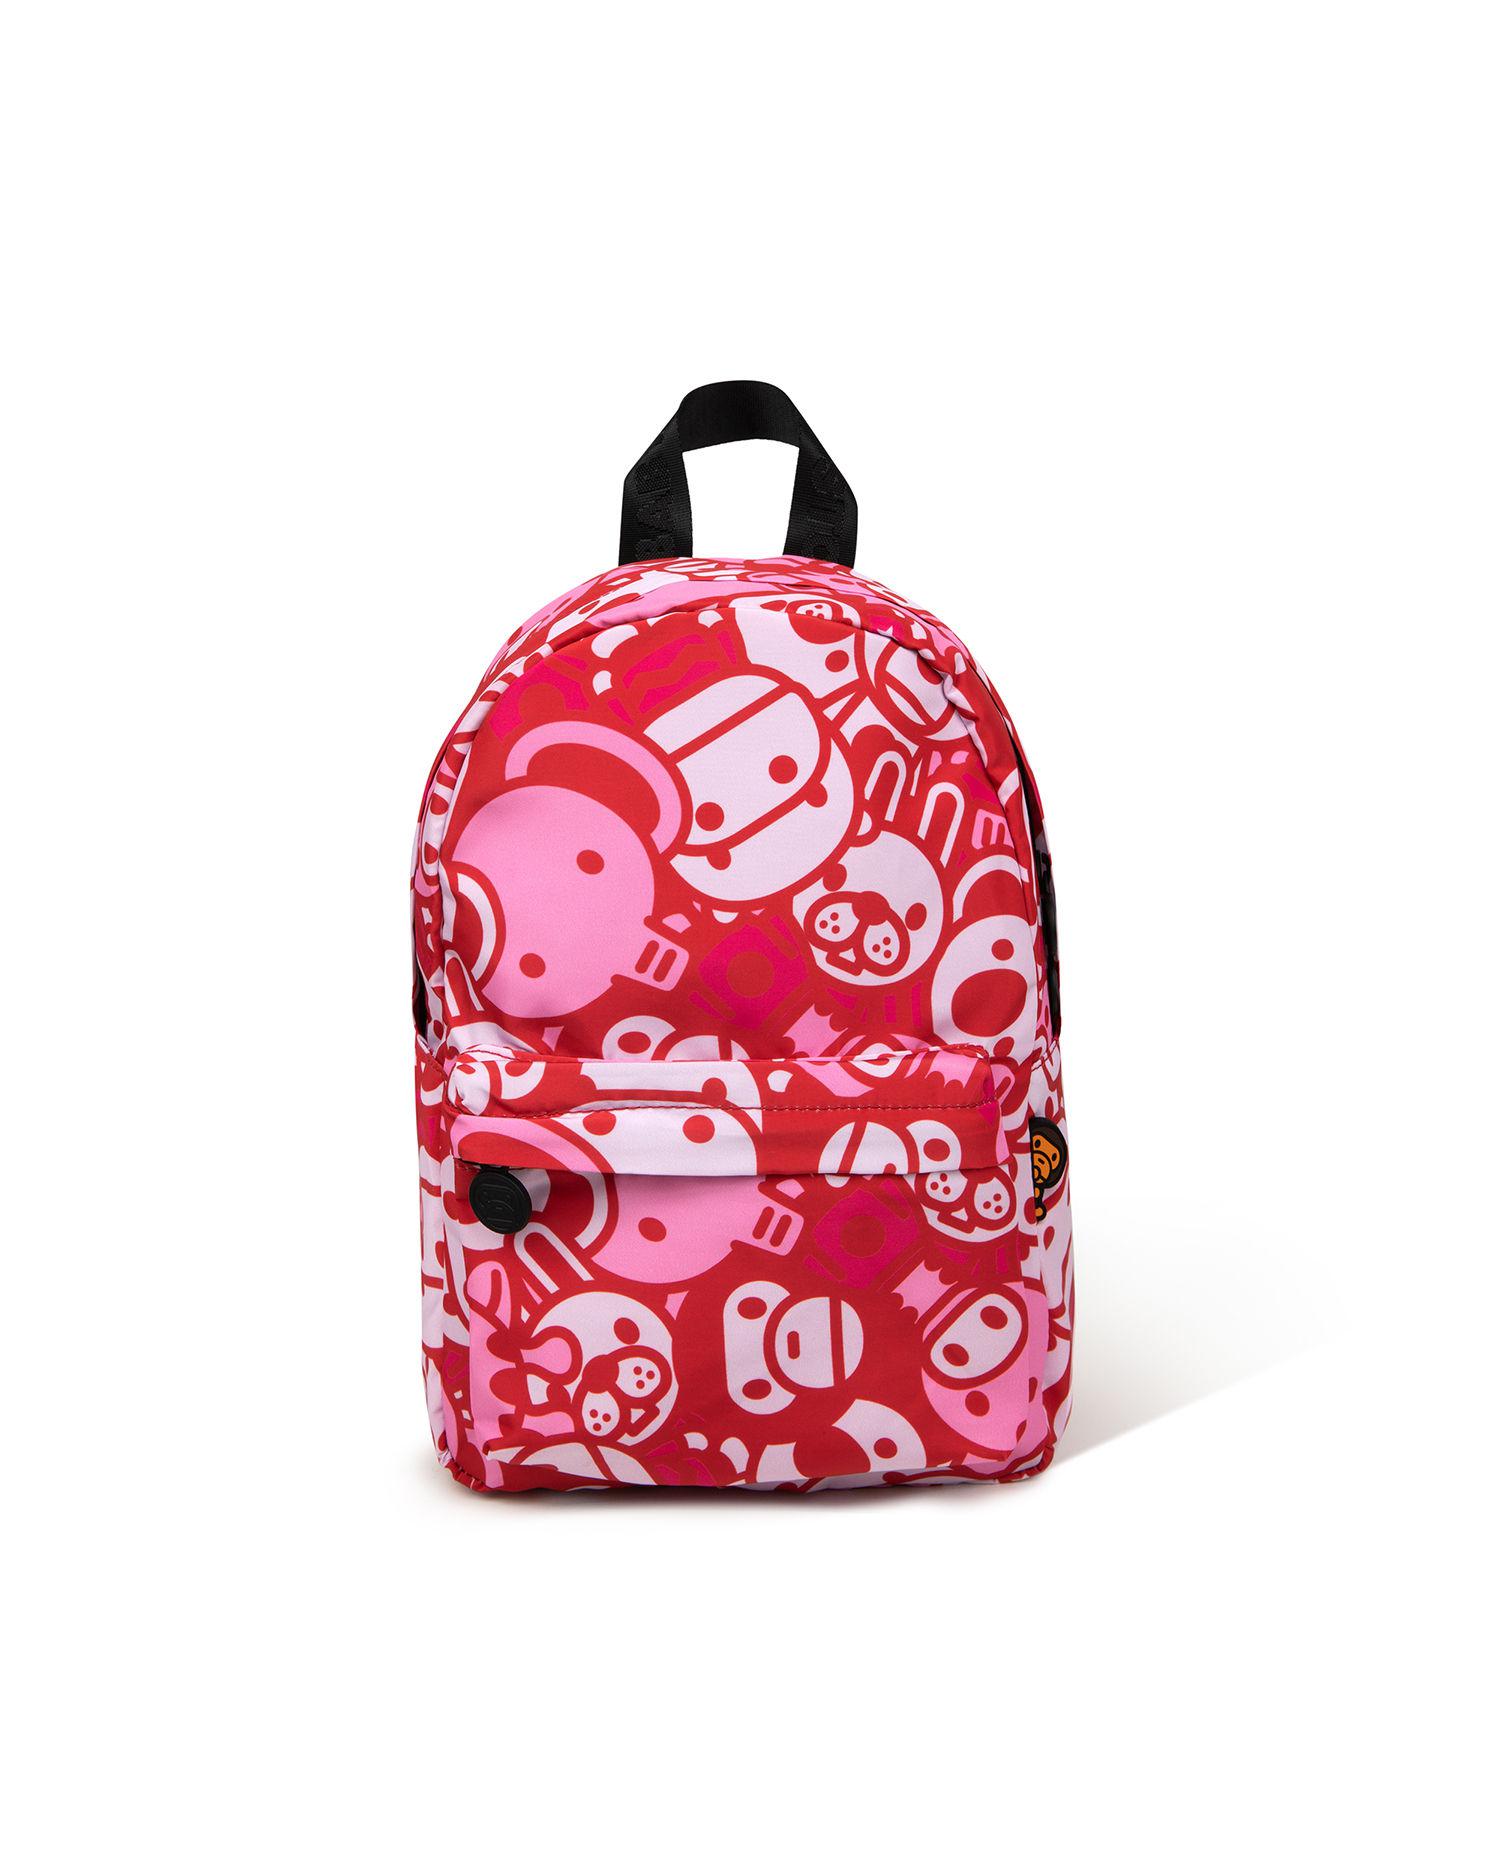 Mini backpack by *BABY MILO(R) STORE